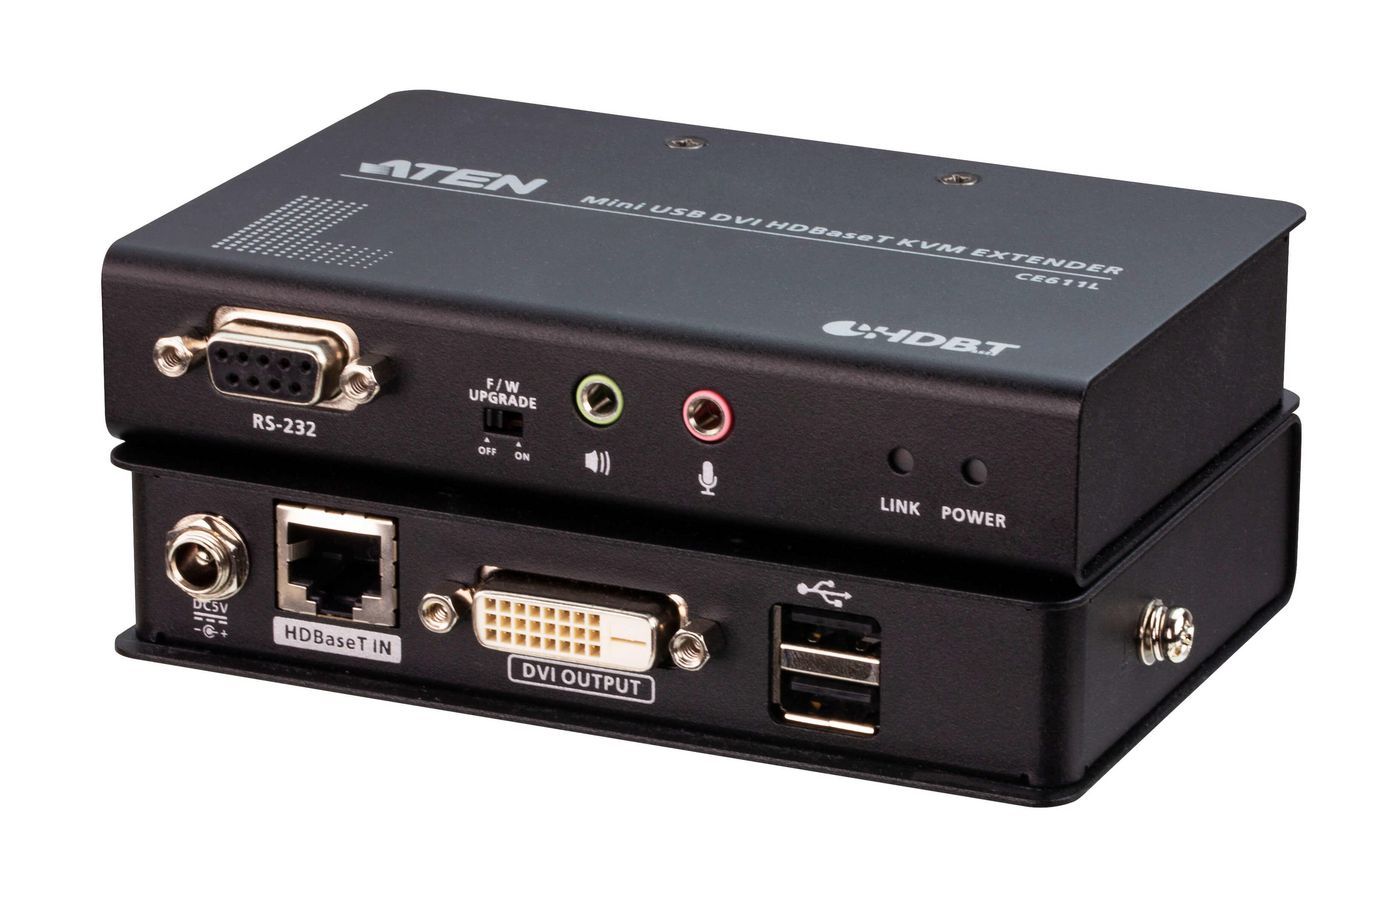 USB DVI Hdbaset. 1.0 Compact KVM Extender (1920 X 1200 Up To 100m) With USB Peripheral Support